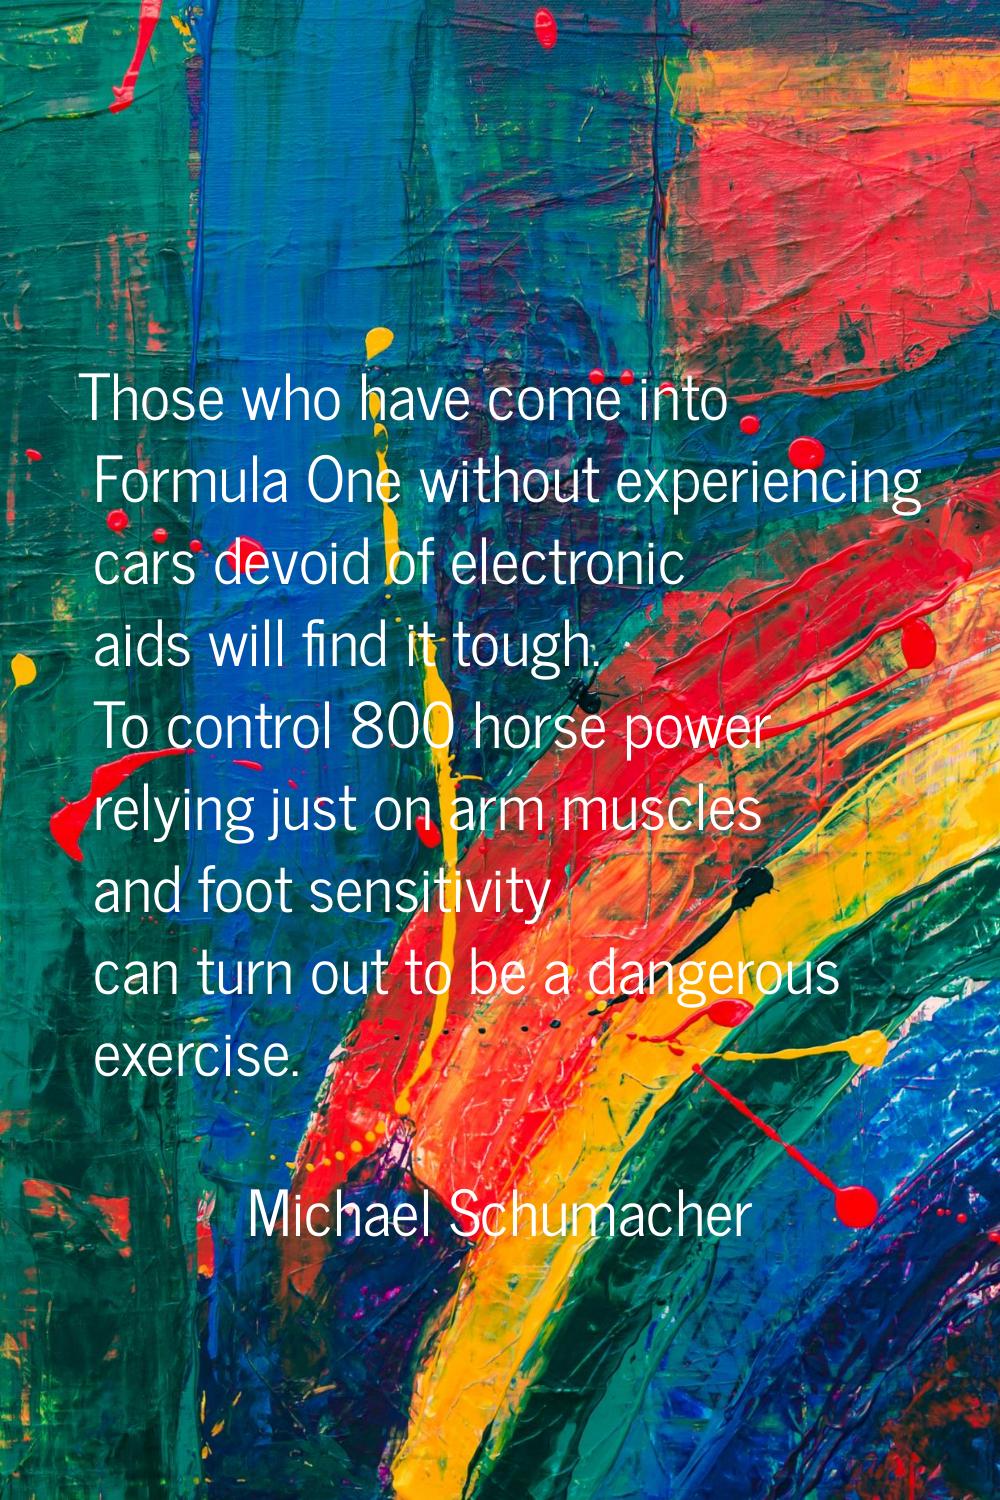 Those who have come into Formula One without experiencing cars devoid of electronic aids will find 